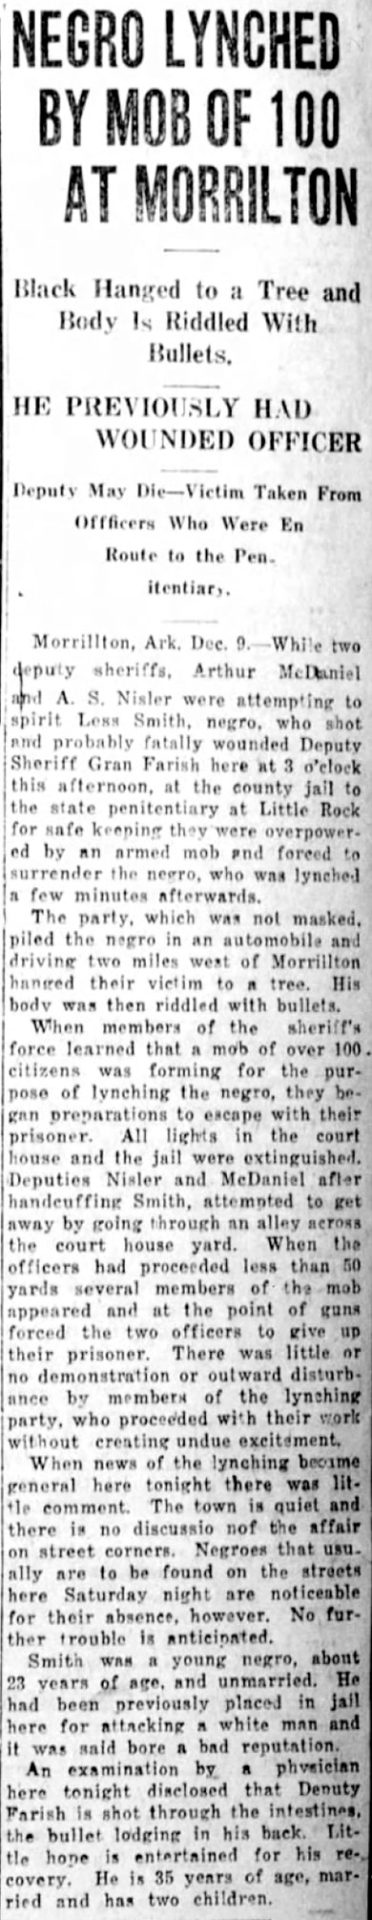 "Negro lynched by mob of 100 at Morrilton" newspaper clipping